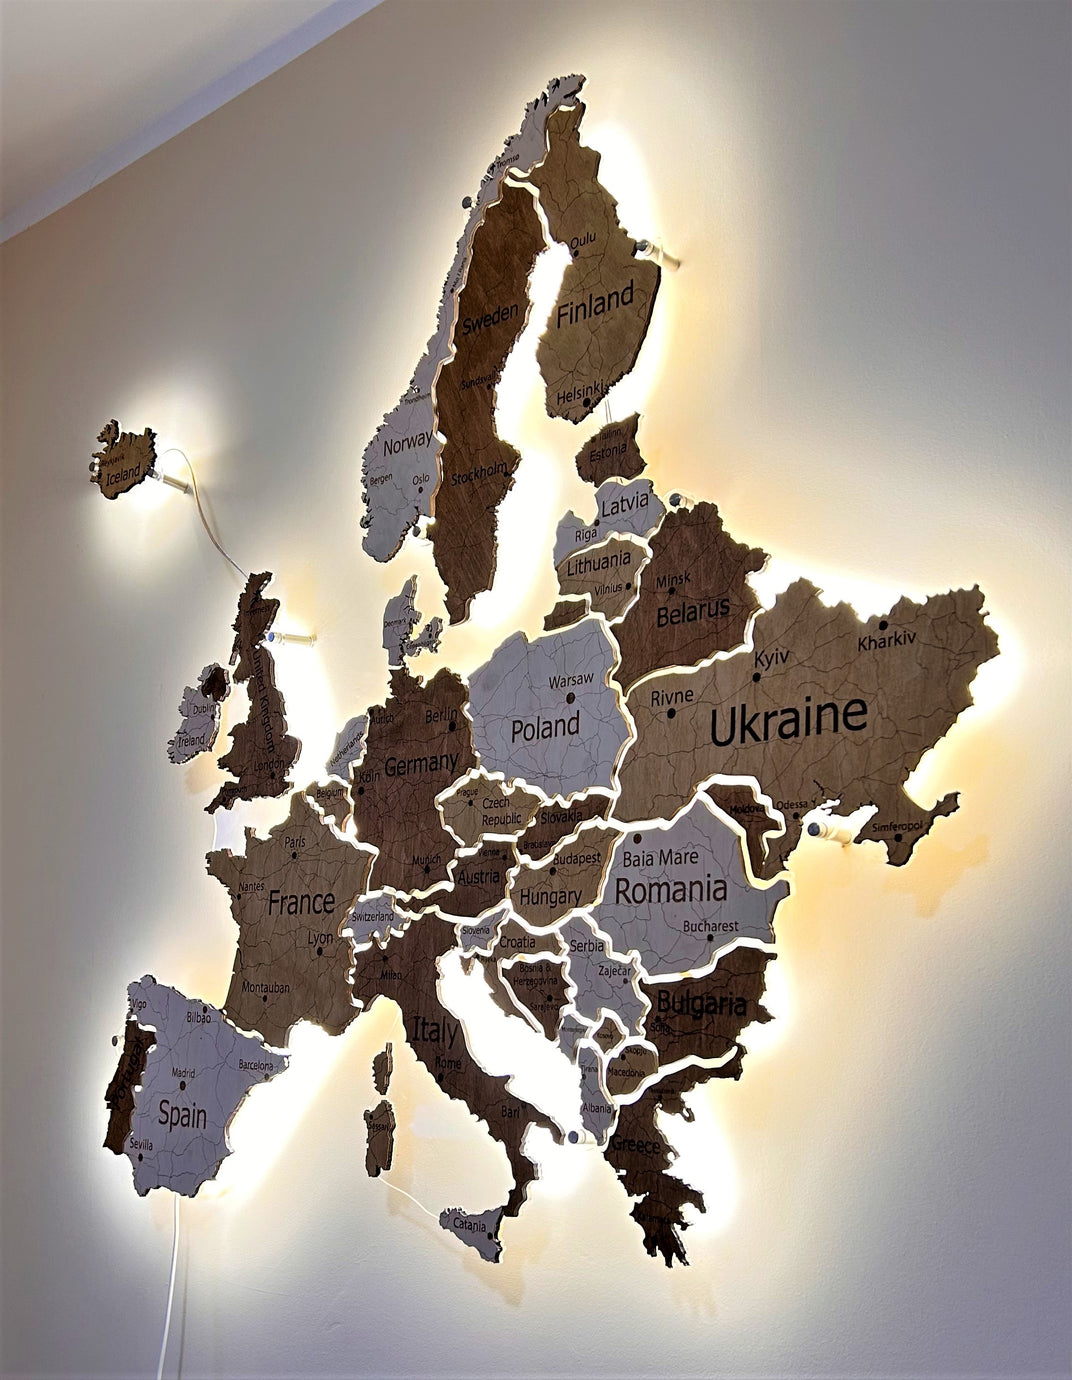 Europe LED map on acrylic glass with backlighting between countries color Terra